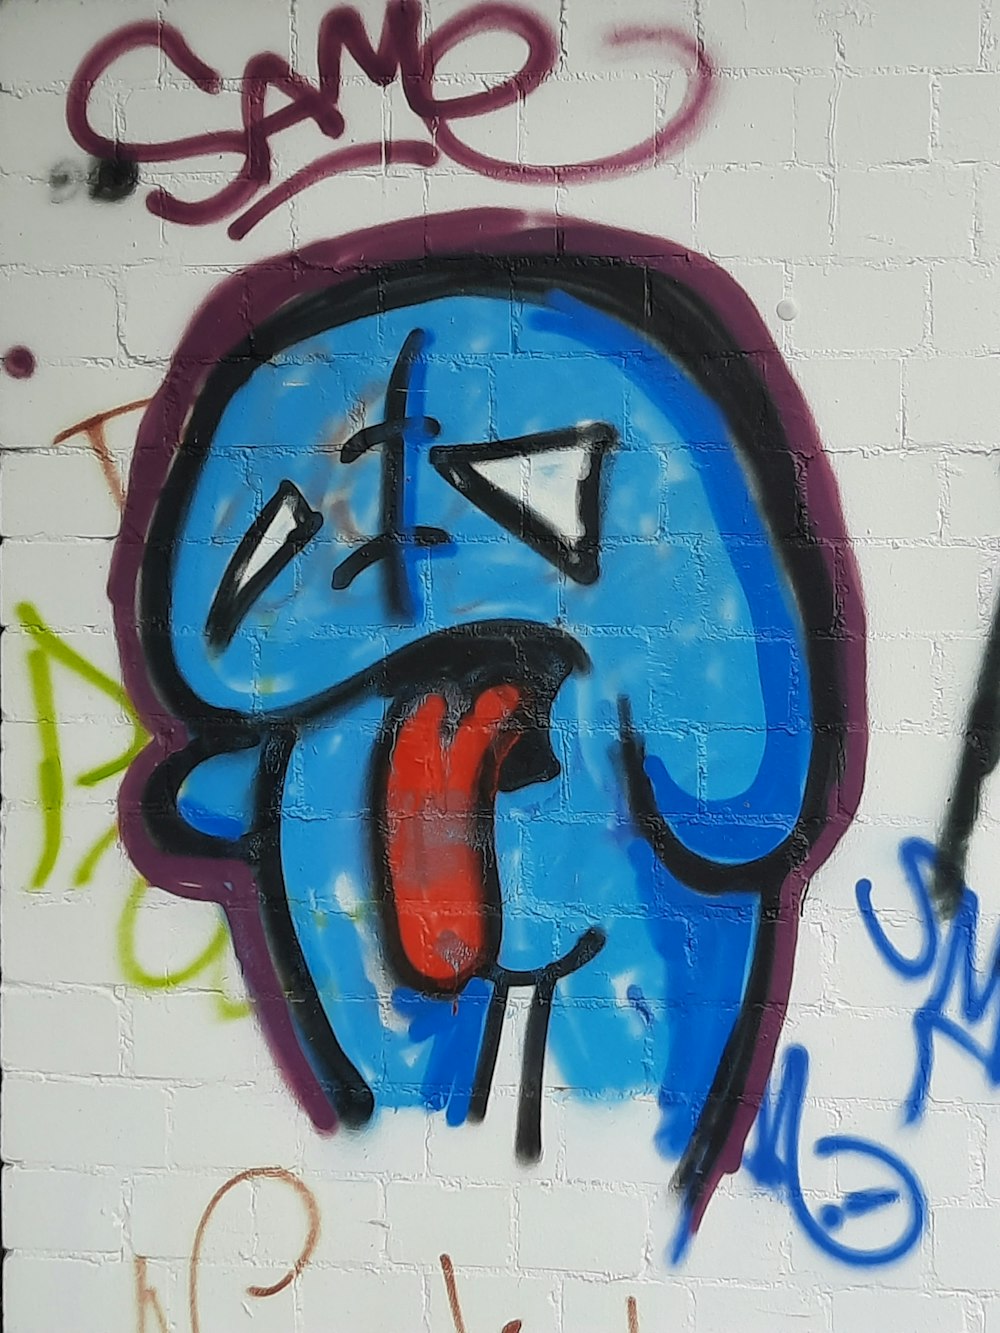 graffiti on a white brick wall with a blue face